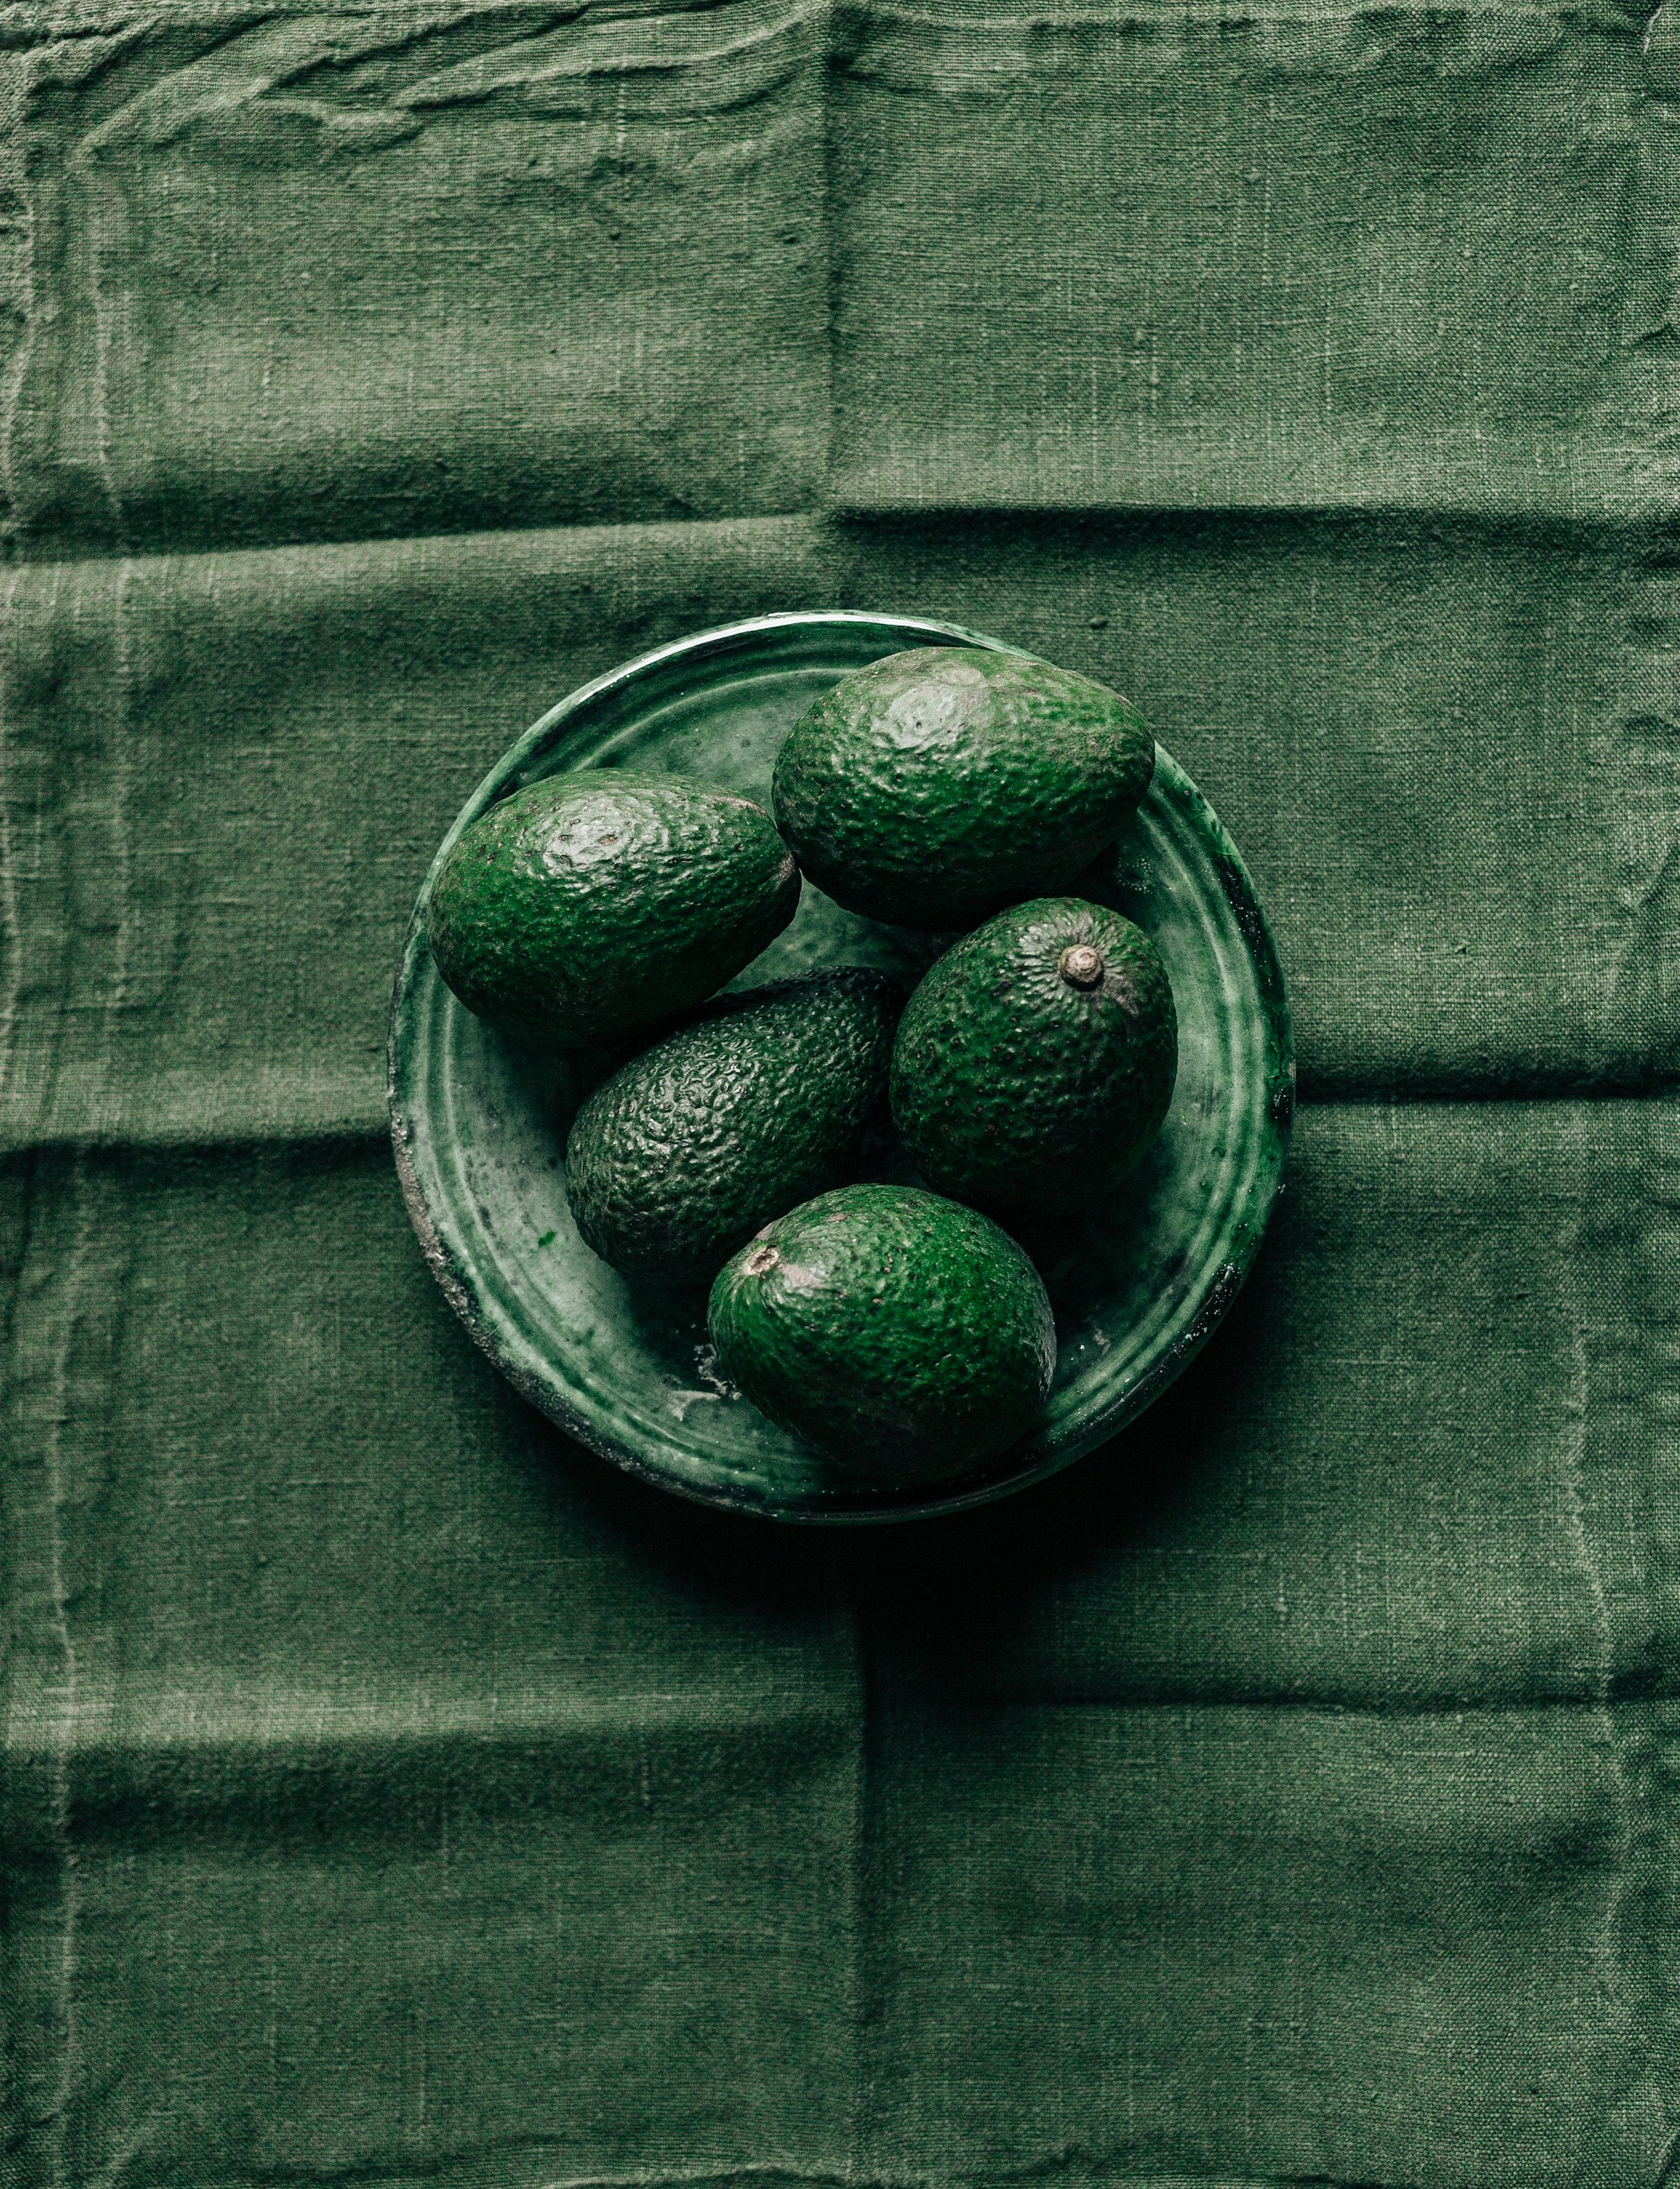 Avocados against Moroccan pottery and Japanese linens.